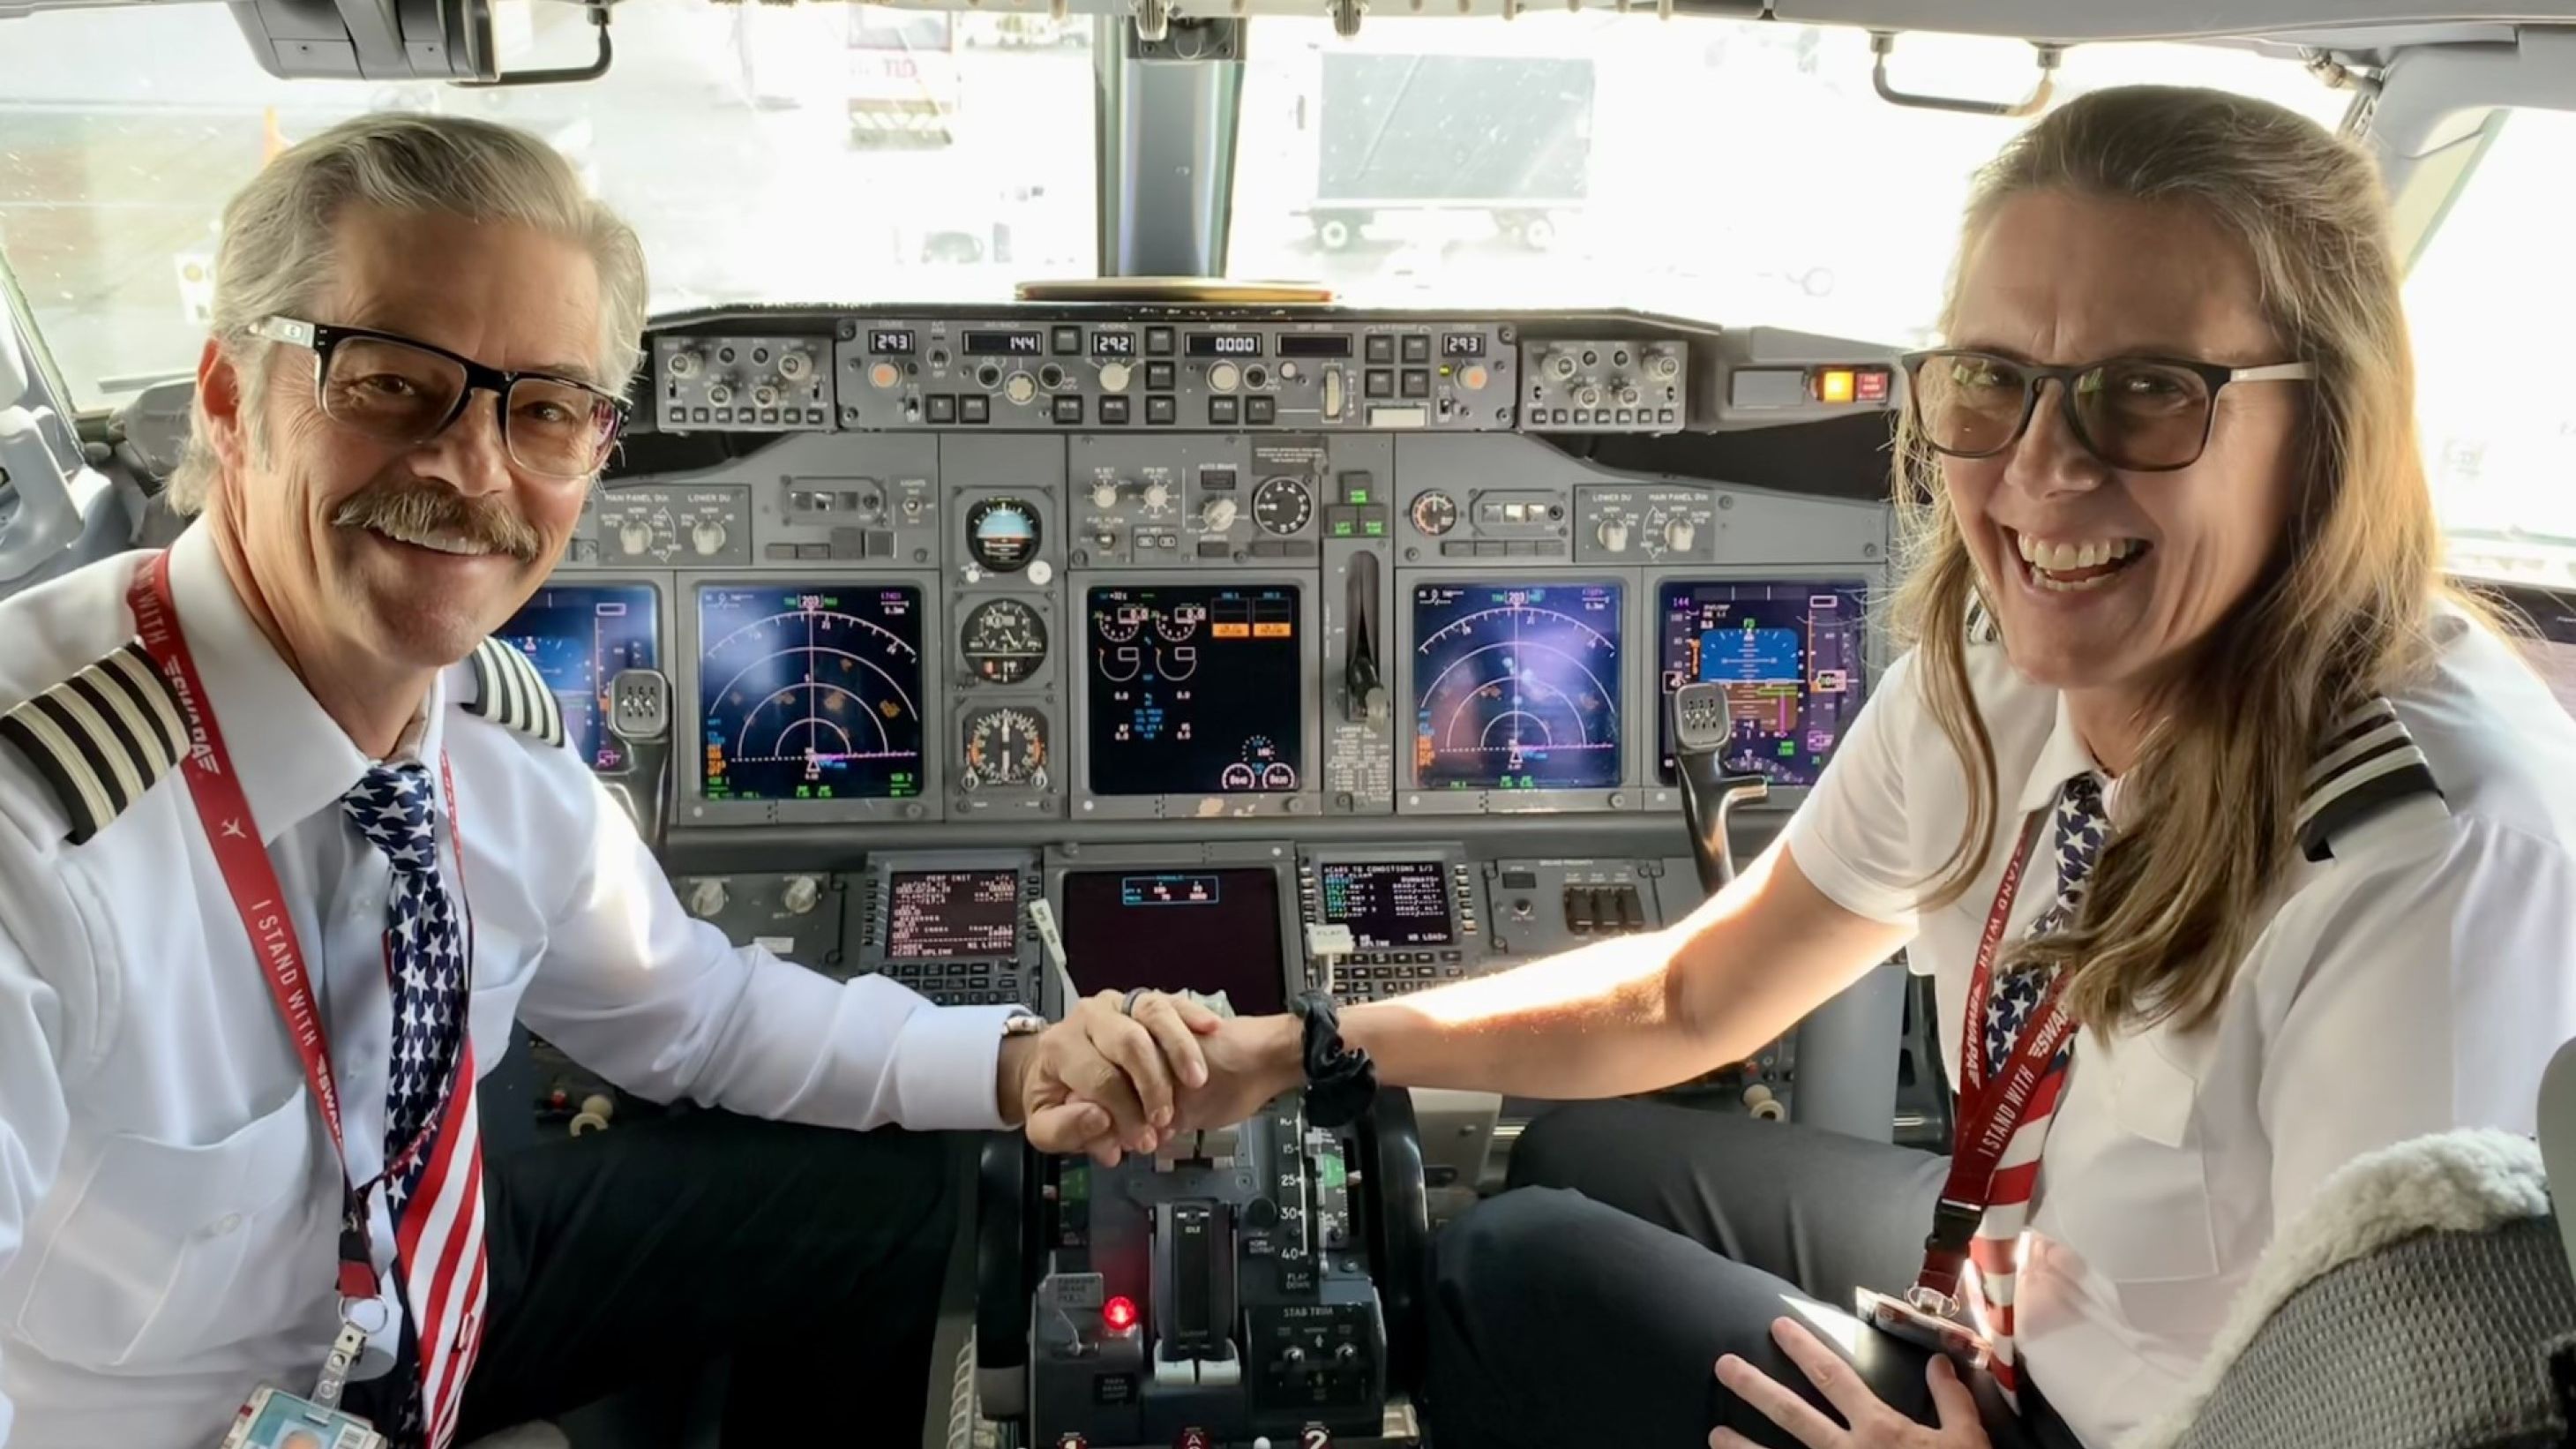 Pilots Joel and Shelley Atkinson are a husband-and-wife duo working at Southwest Airlines.